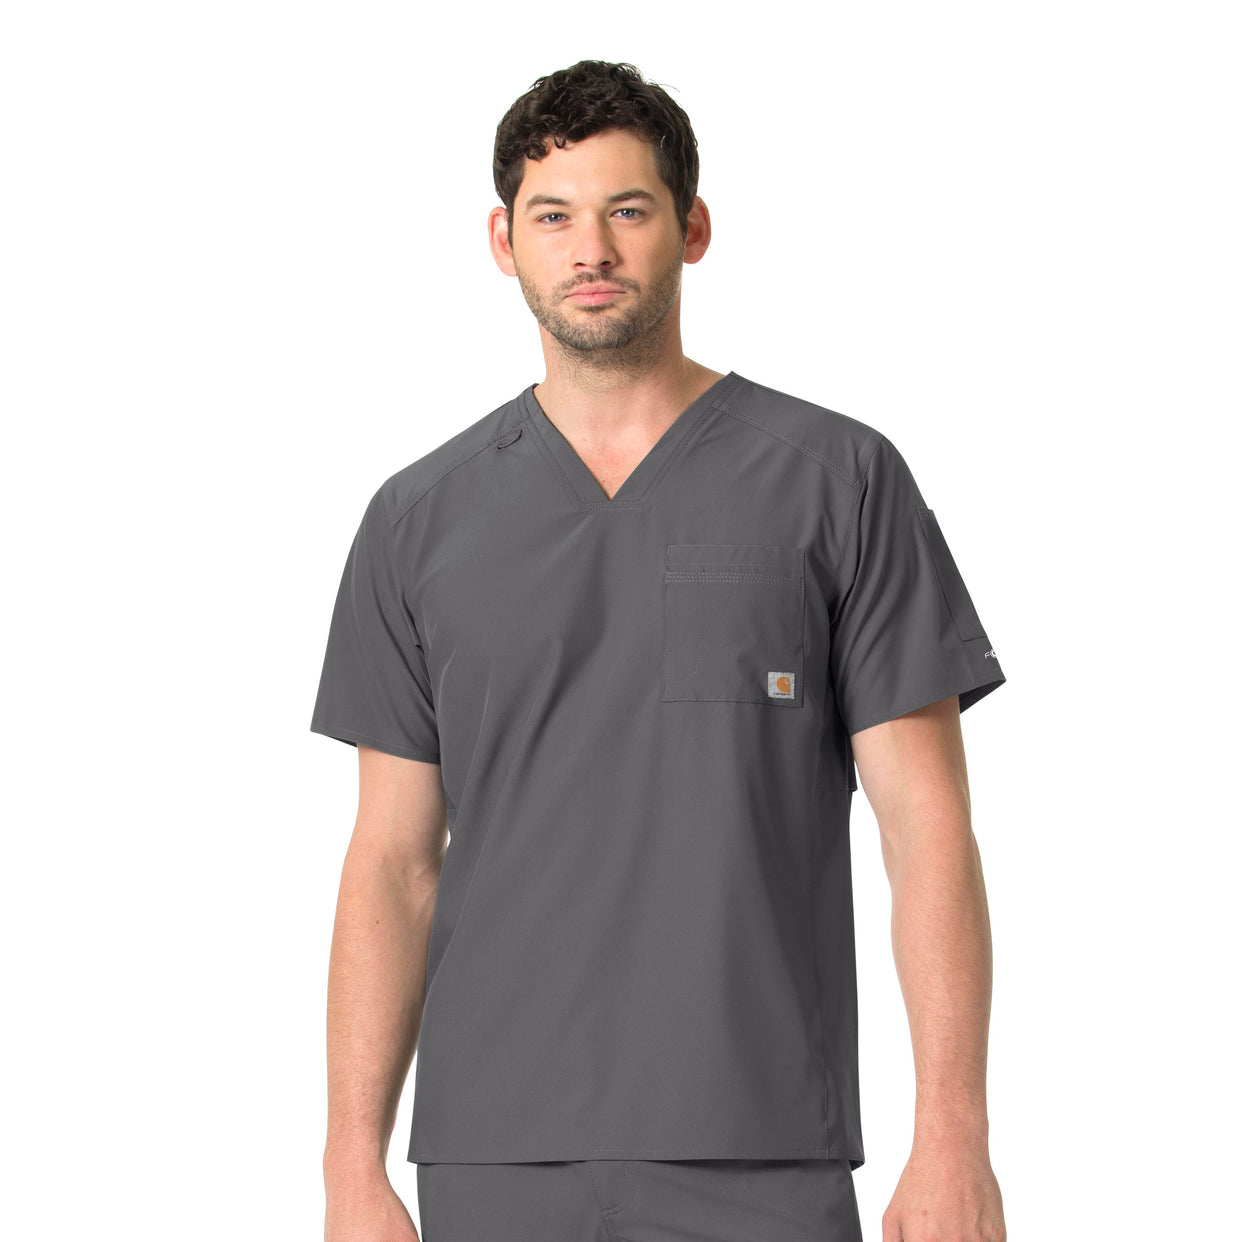 Force Liberty Men's Twill Chest Pocket Scrub Top Pewter